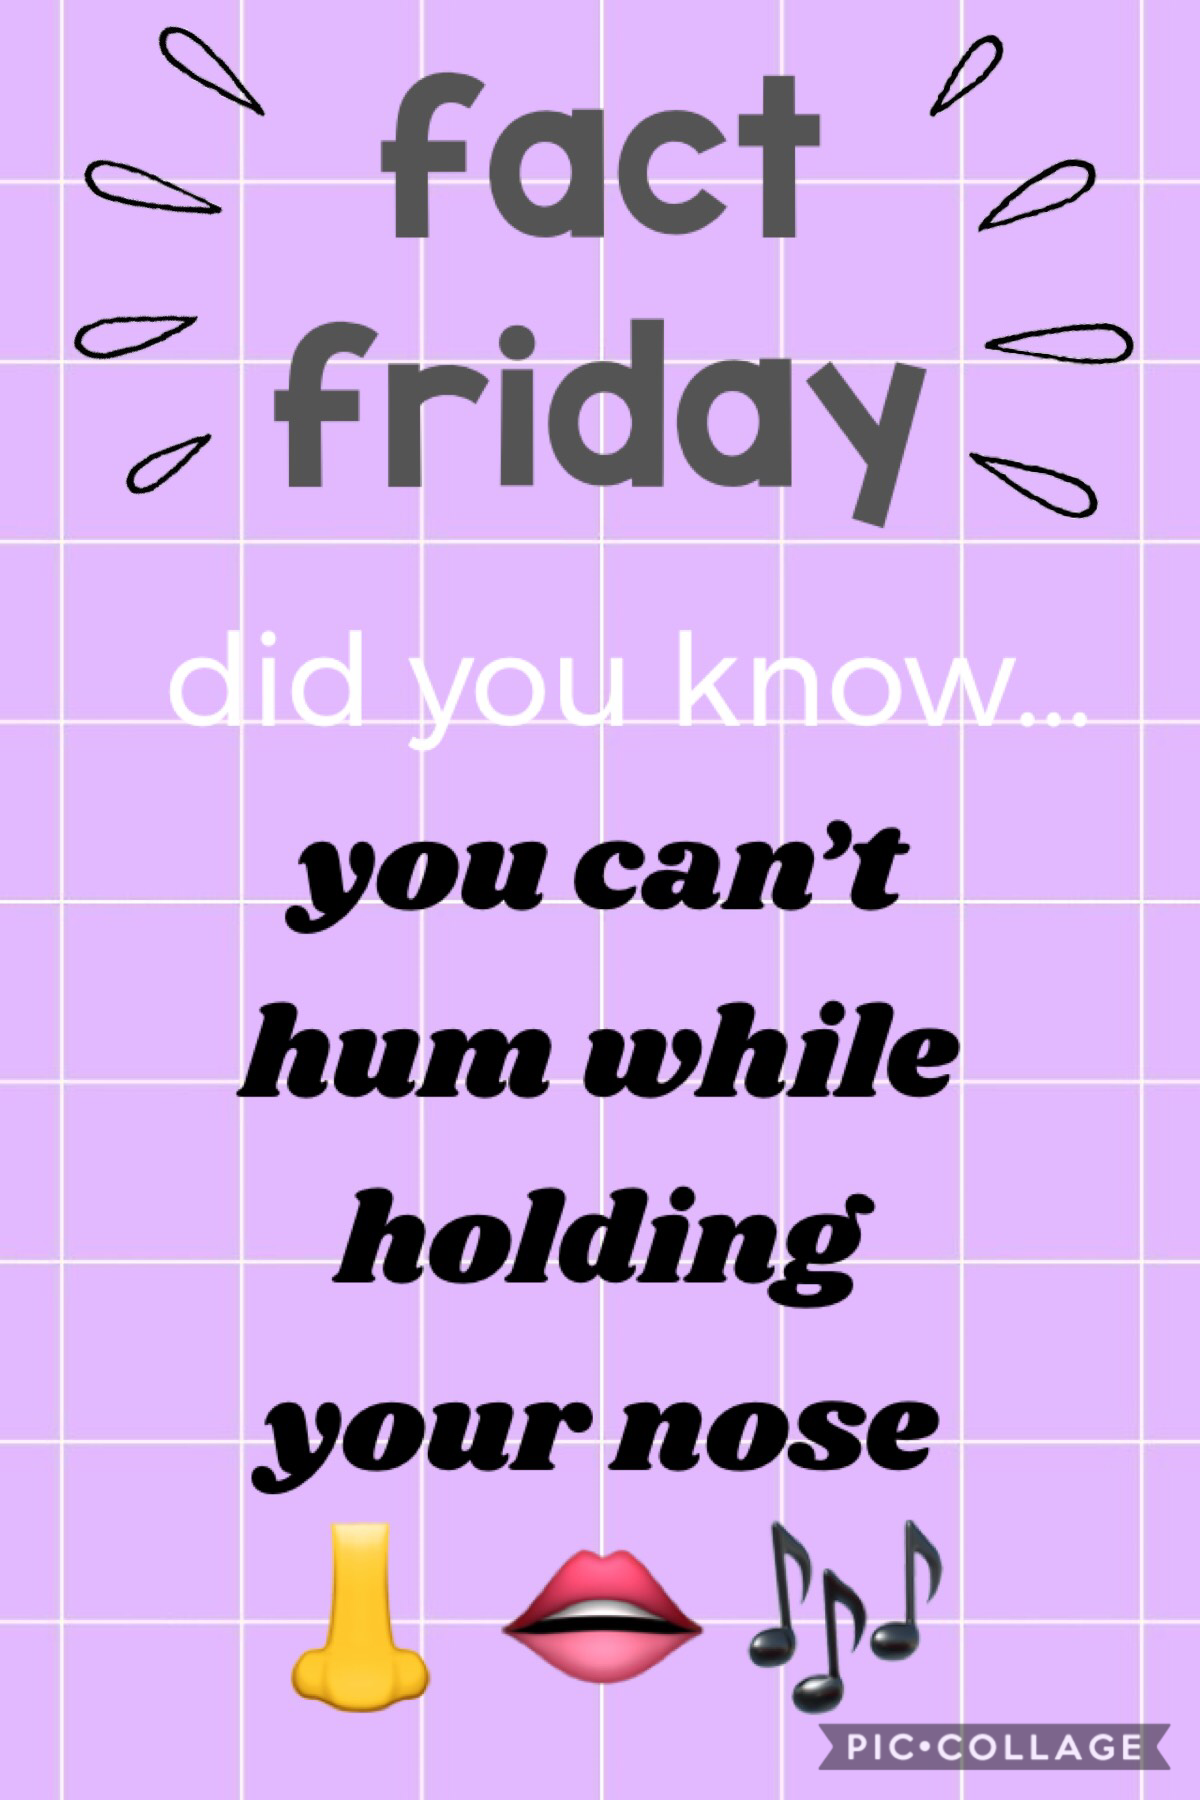 tap!
fact friday!
follow for more facts!